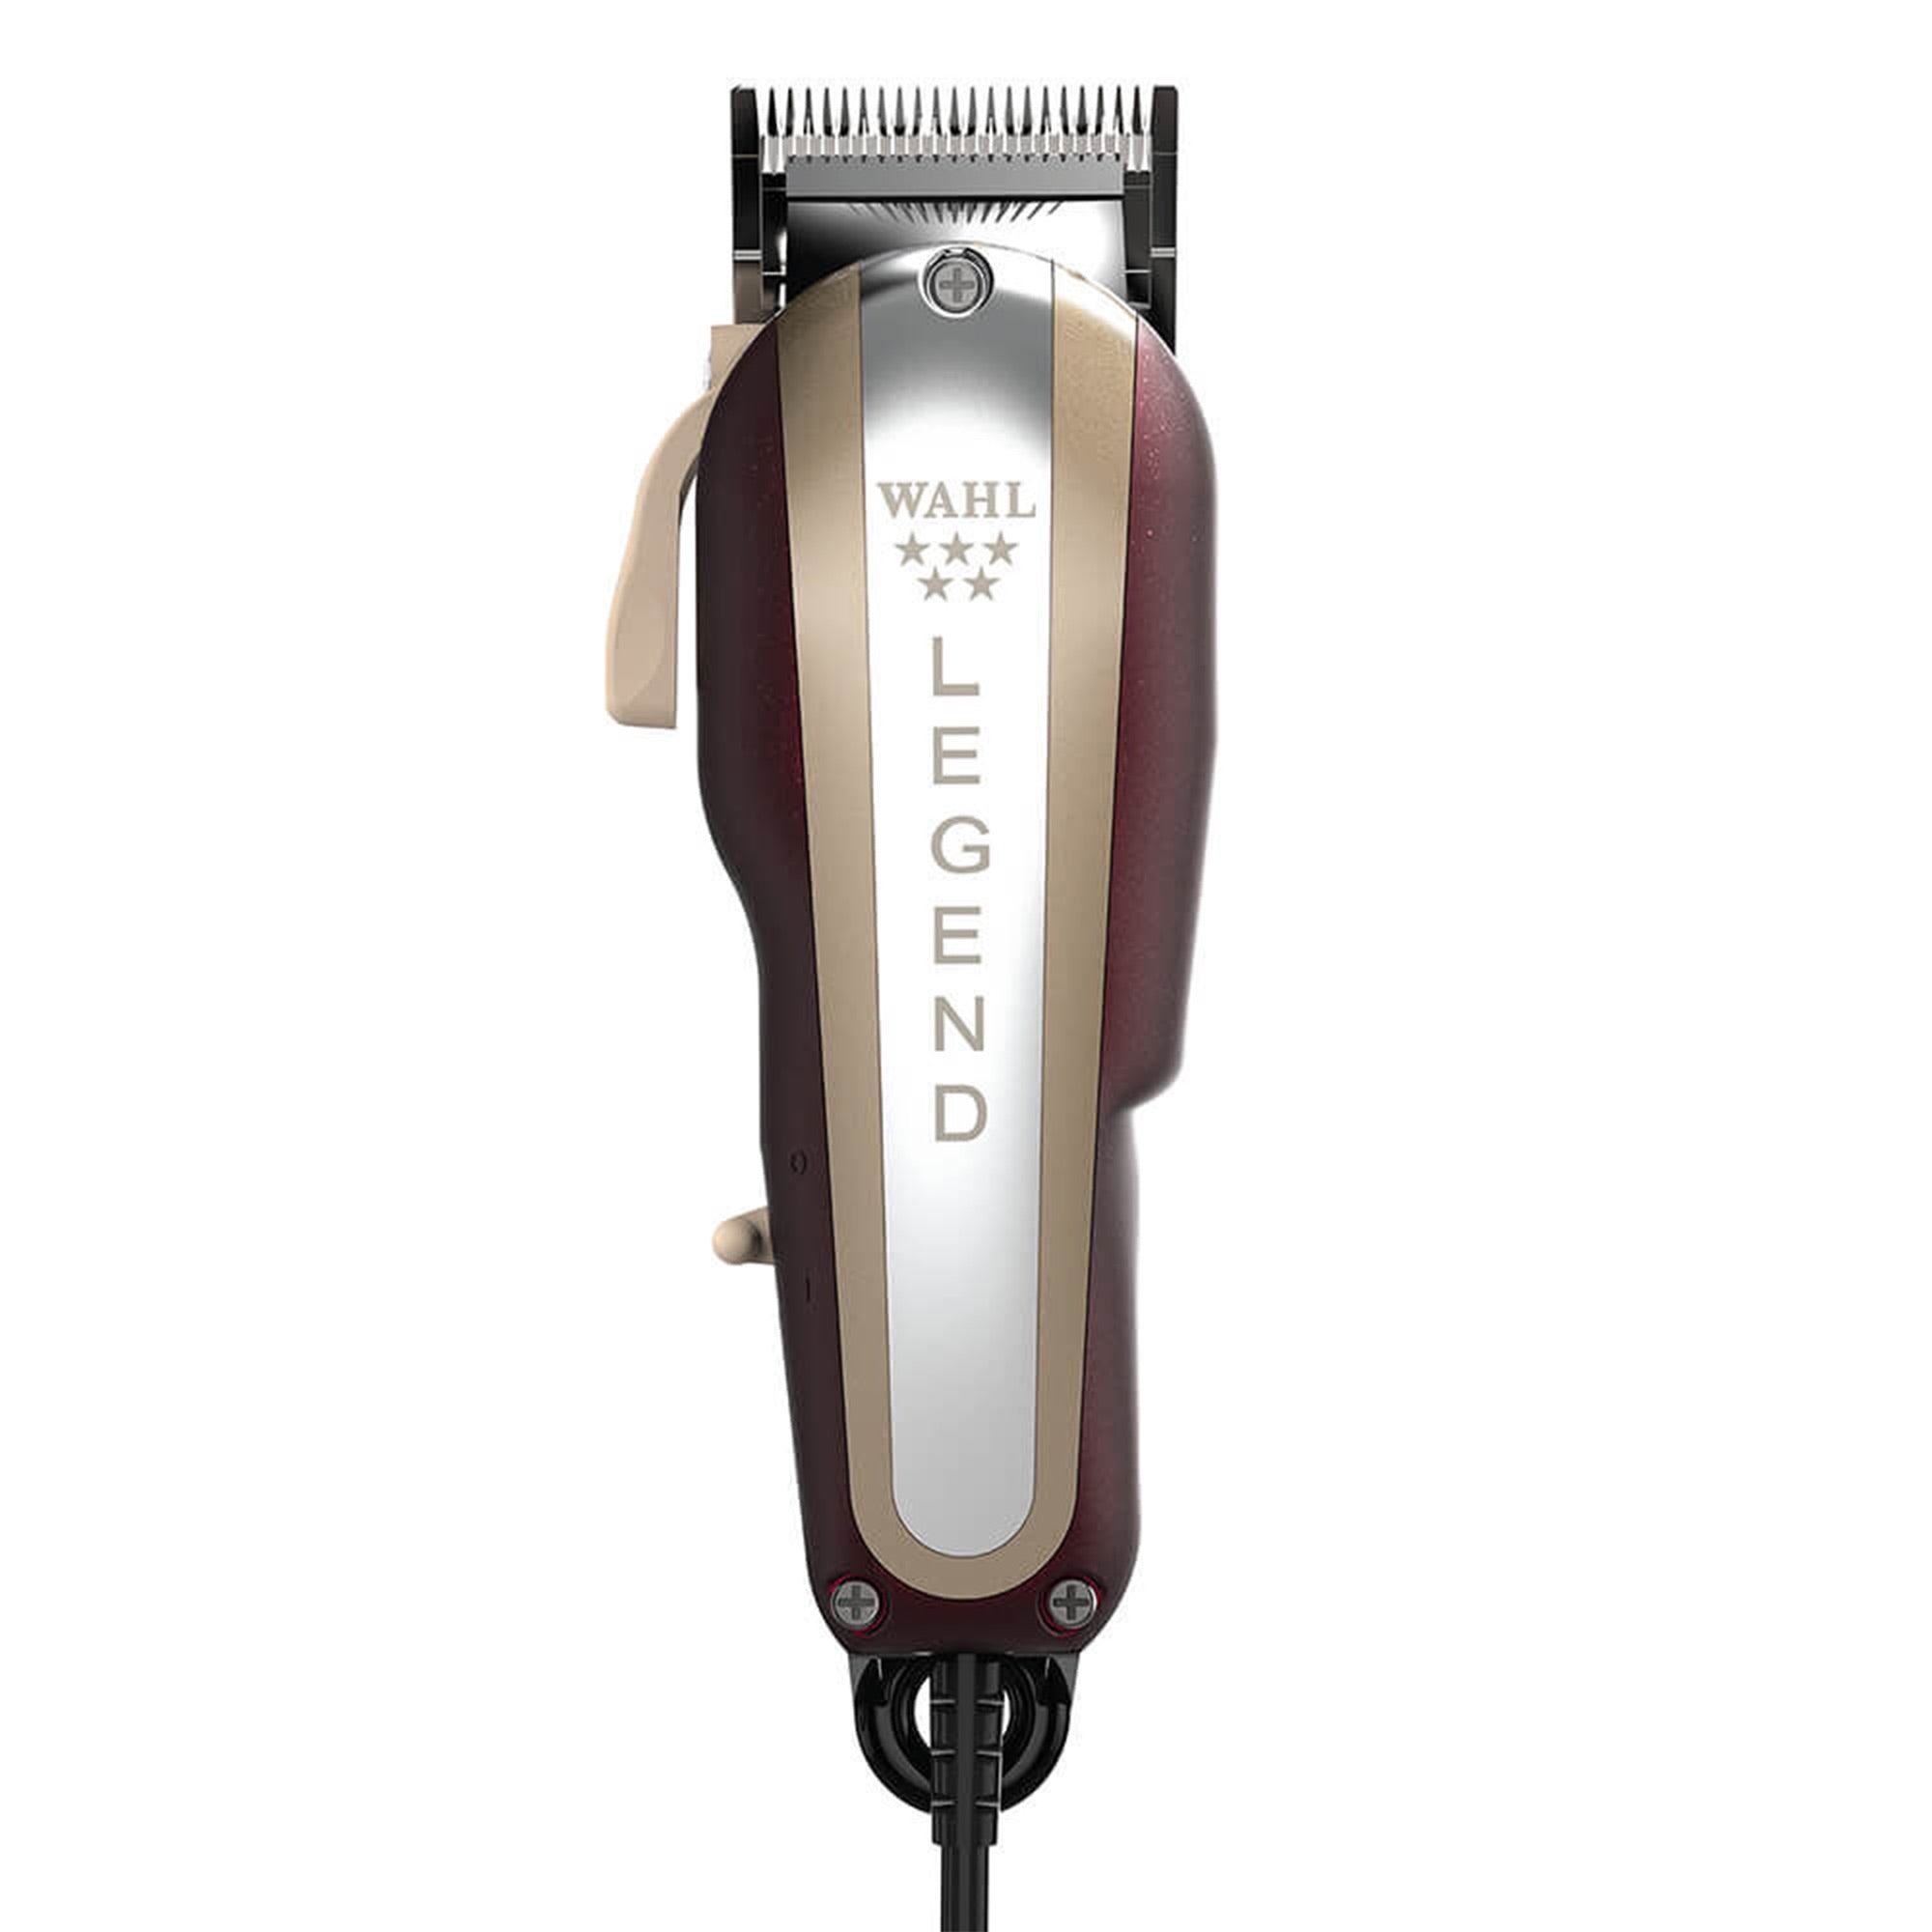 Wahl - 5 Star Legend Clipper Corded